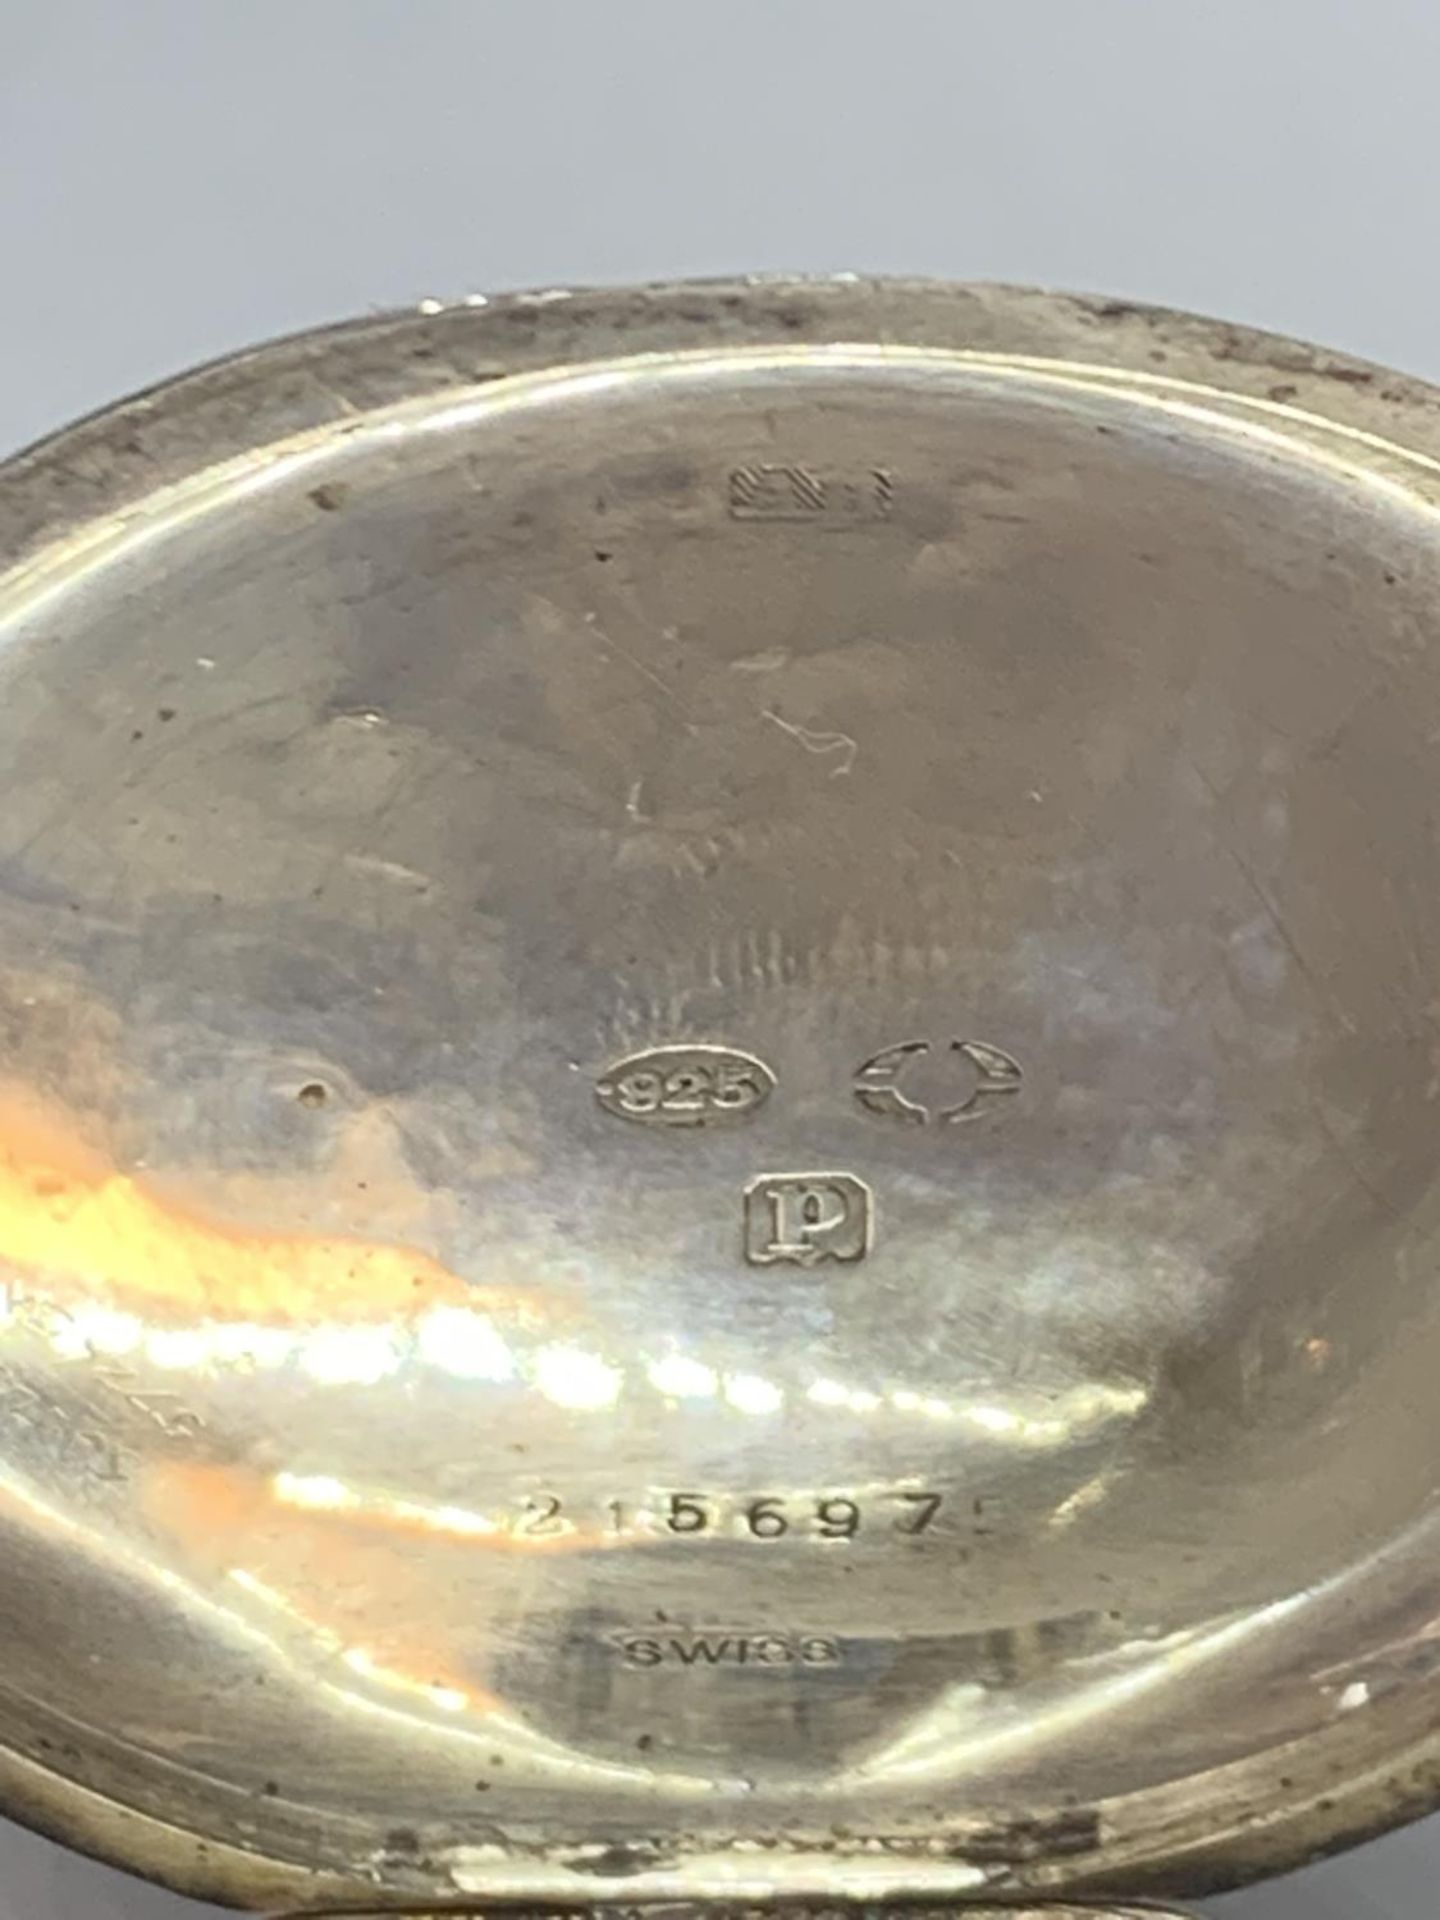 A MARKED 925 SILVER POCKET WATCH WITH A CHAIN SEEN WORKING BUT NO WARRANTY - Image 3 of 3